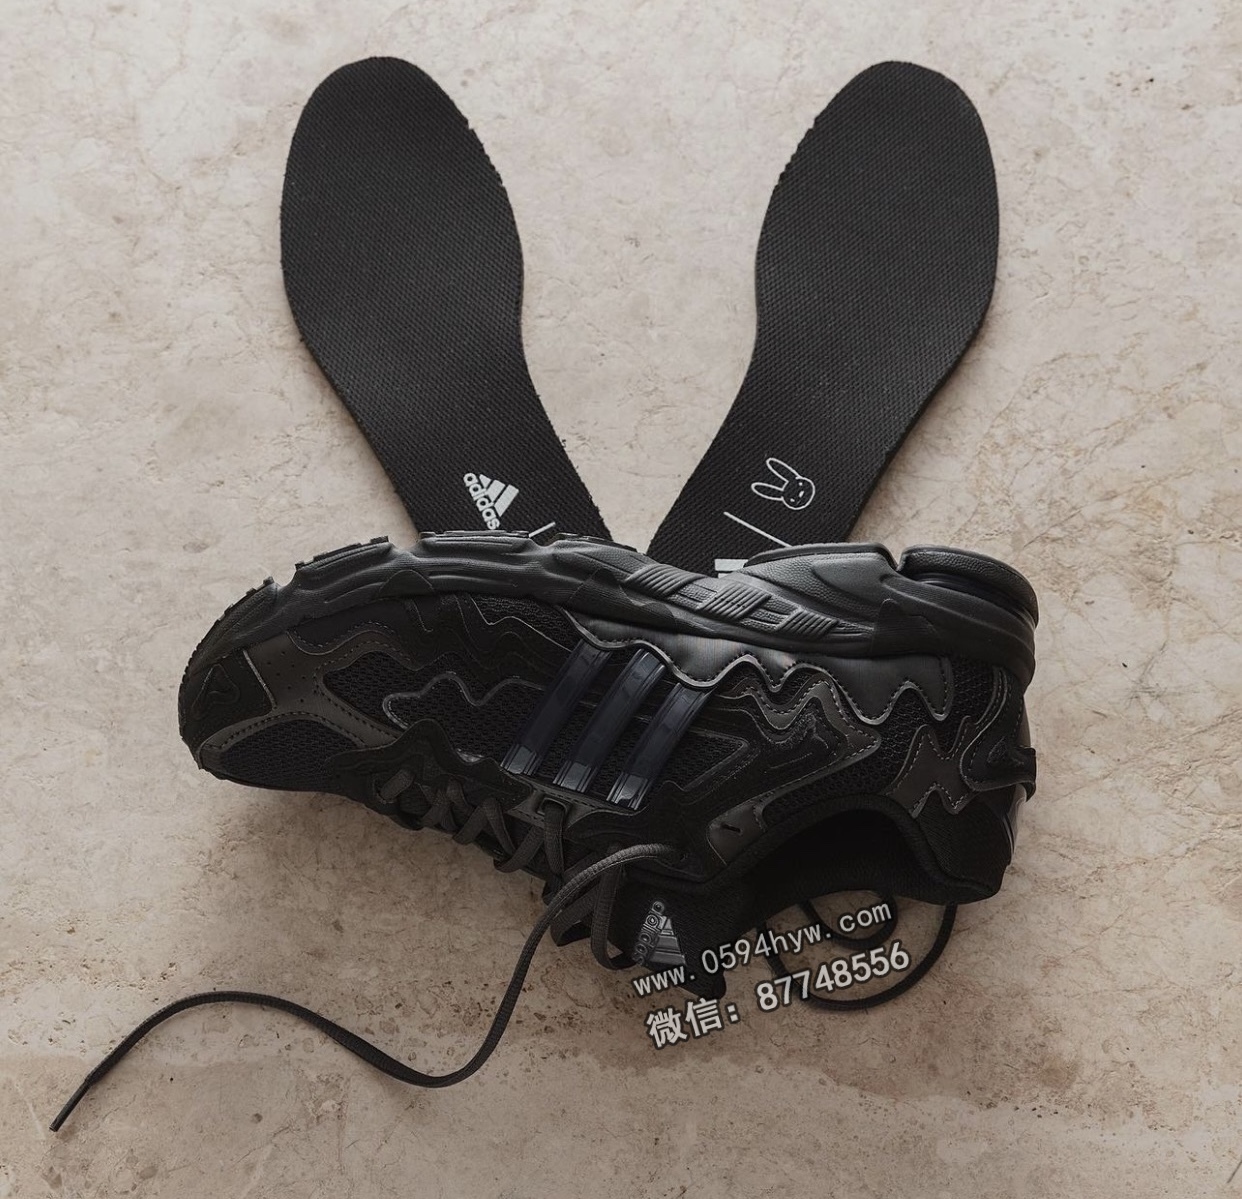 Bad-Bunny-adidas-Response-CL-Black-ID0805-Release-Date-6-1